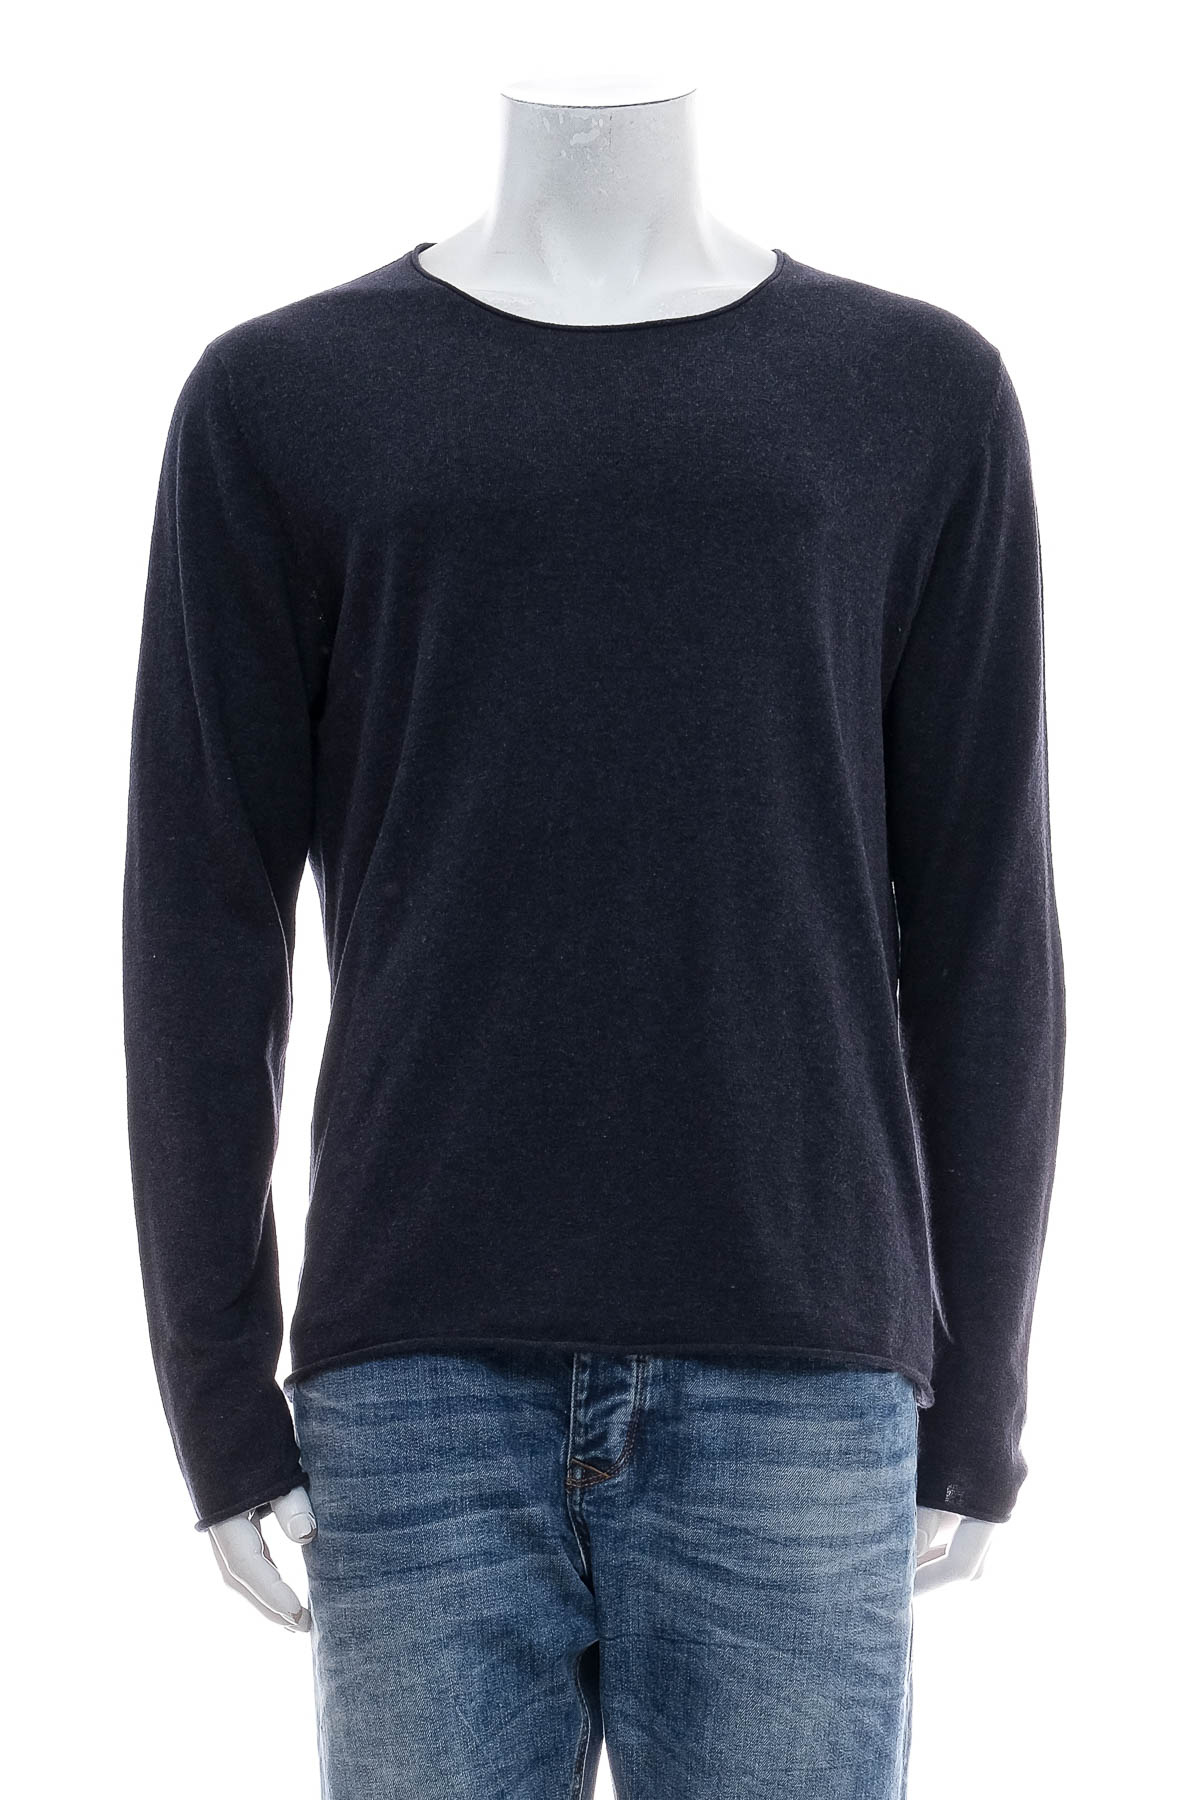 Men's sweater - SELECTED HOMME - 0